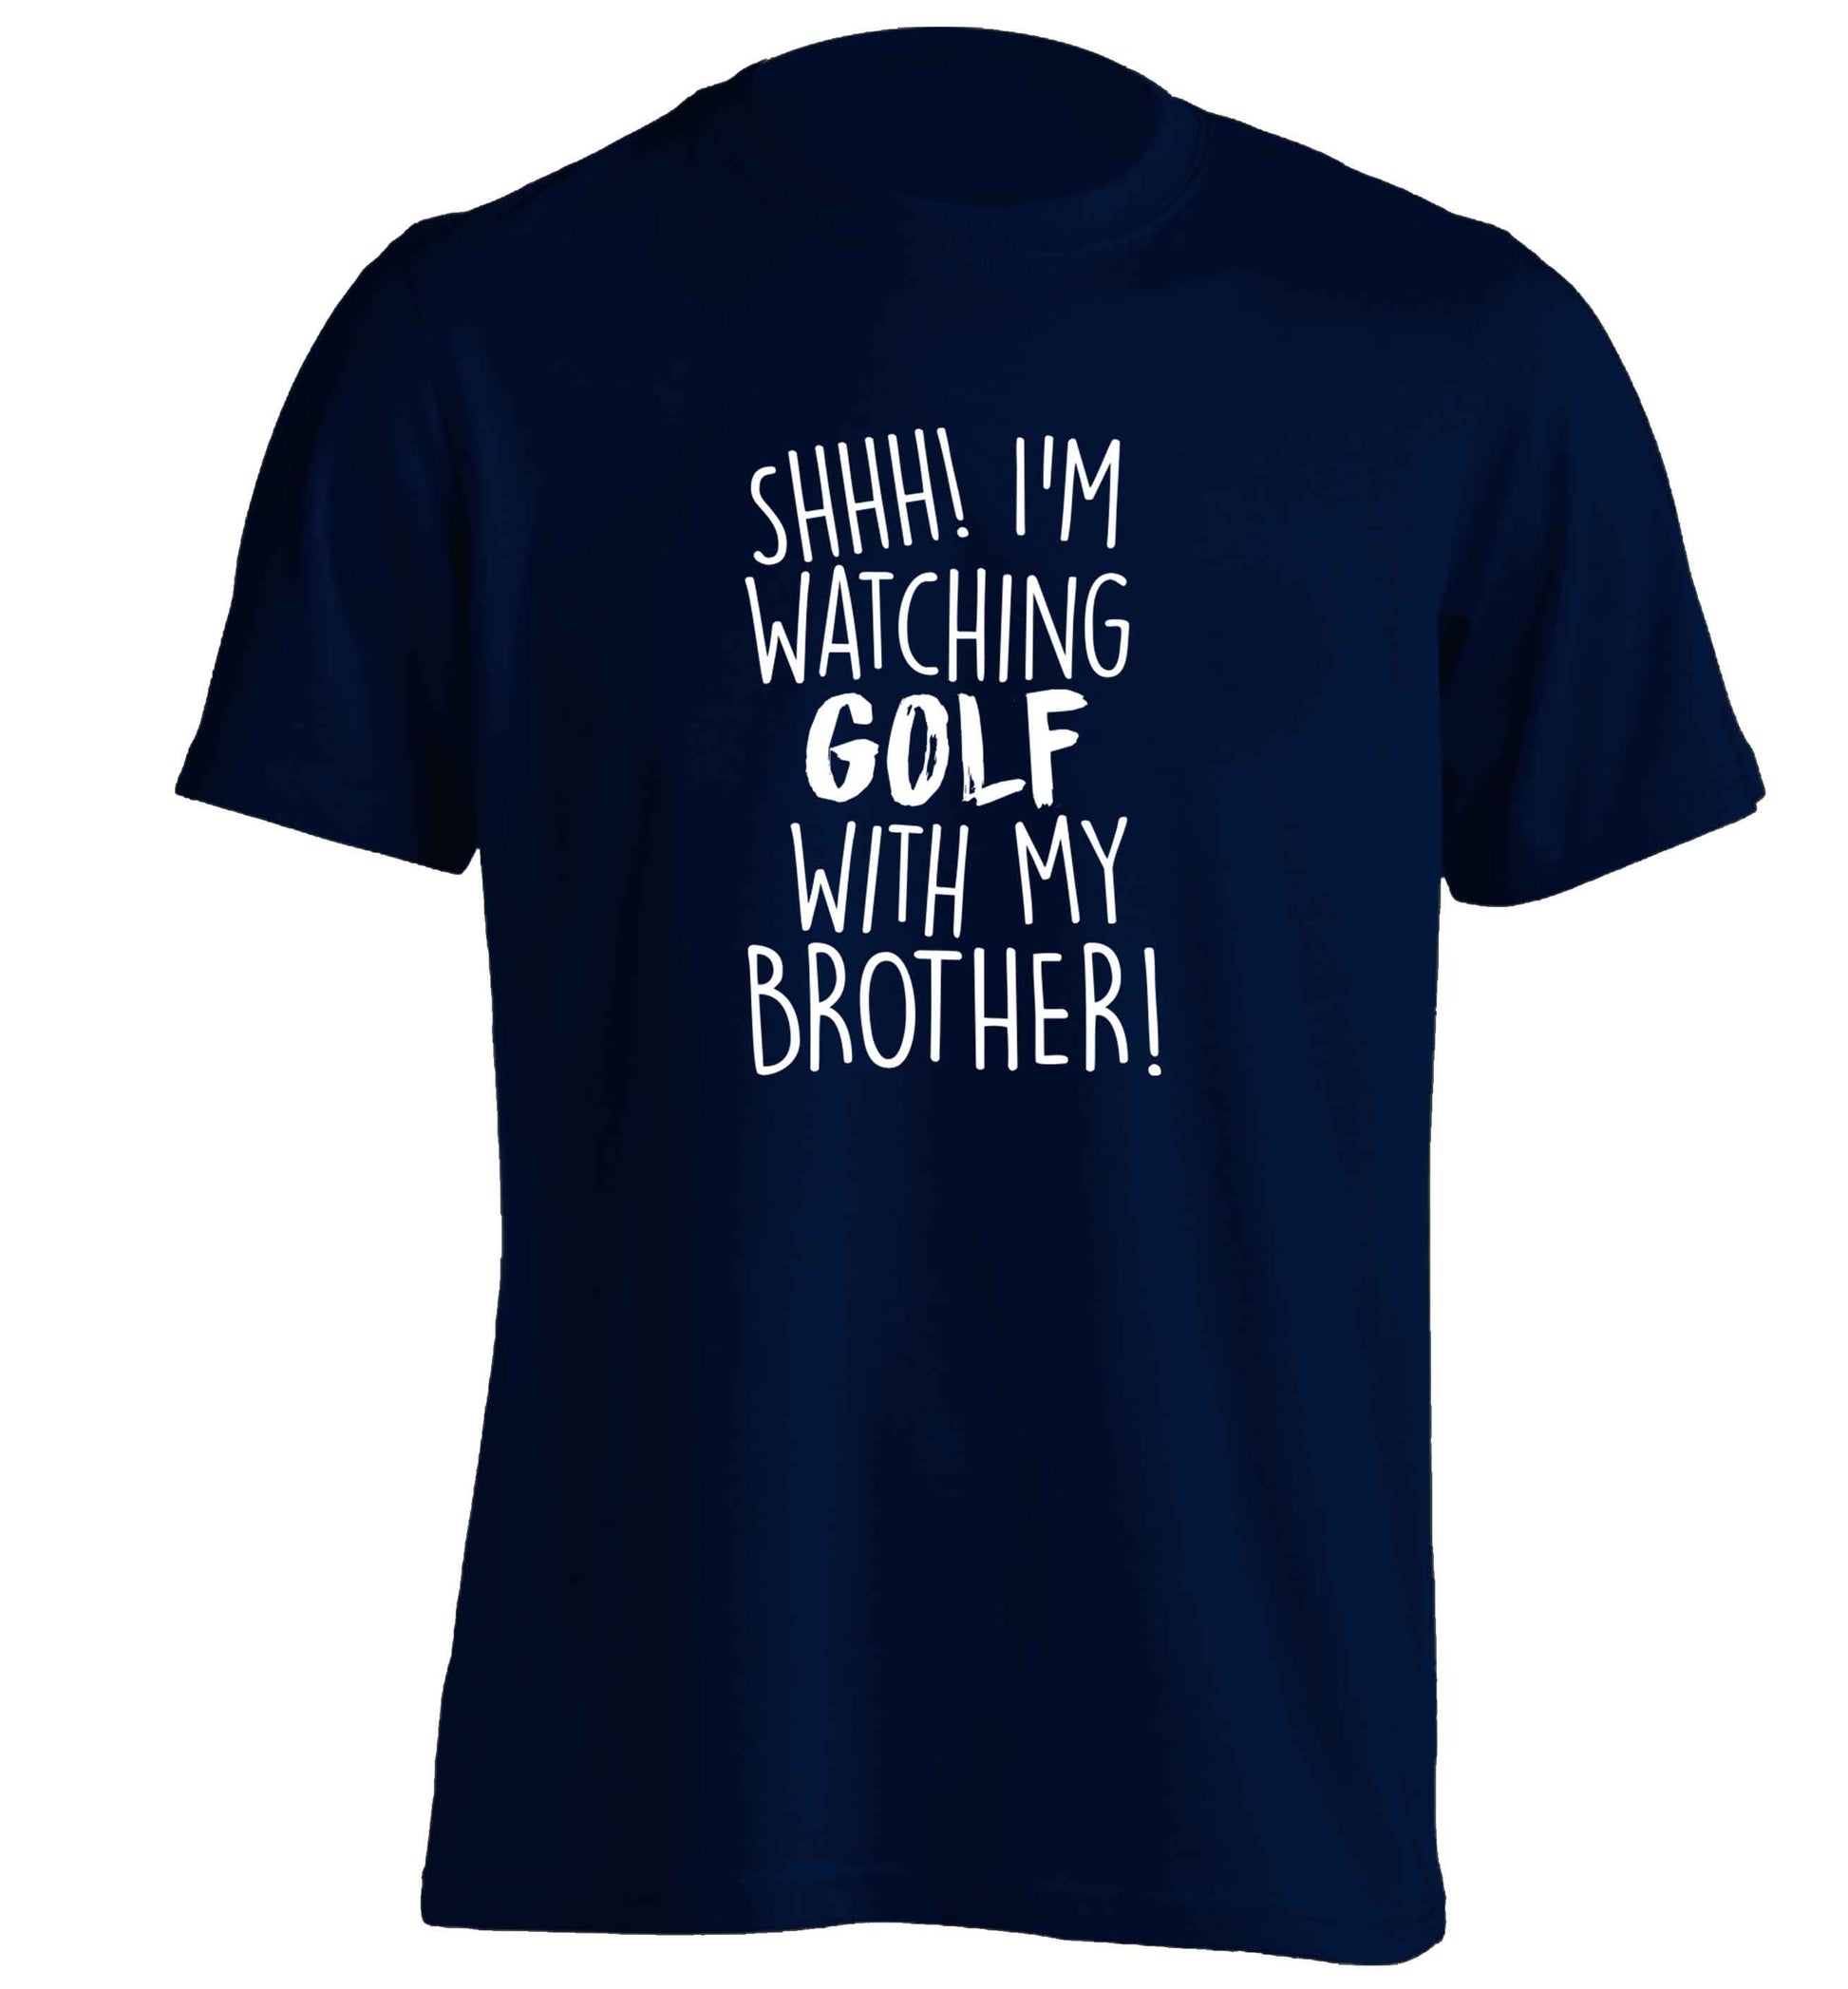 Shh I'm watching golf with my brother adults unisex navy Tshirt 2XL